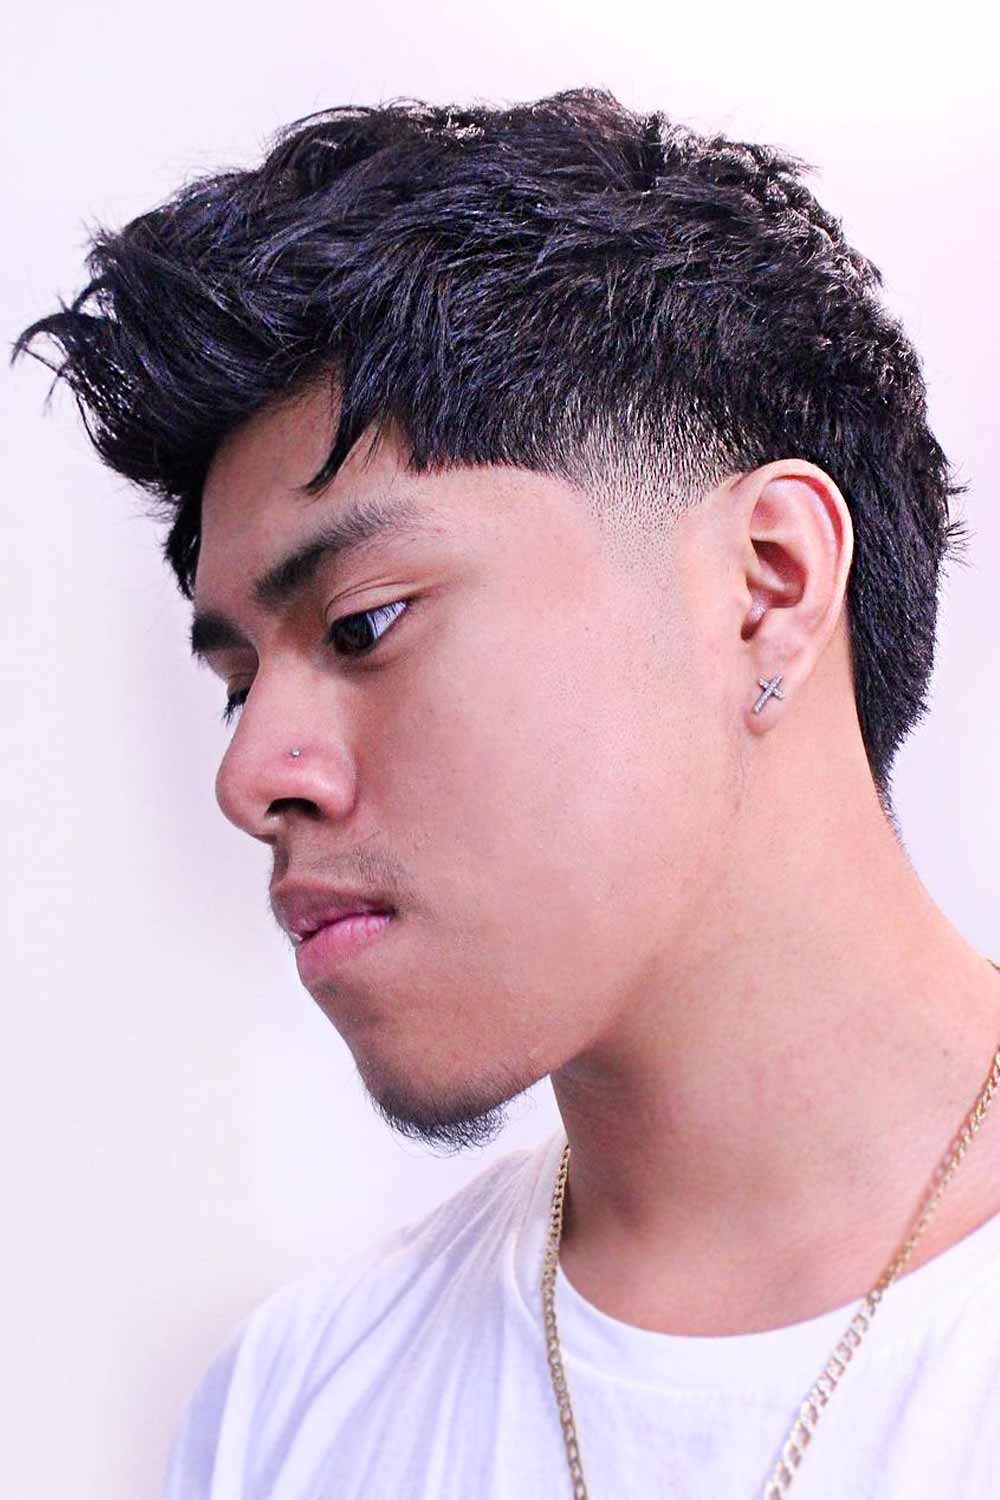 Asian Men Hairstyle Mullet Fade #asianhairstylesmen #asianhairstyles #asianhaircut #asianmen